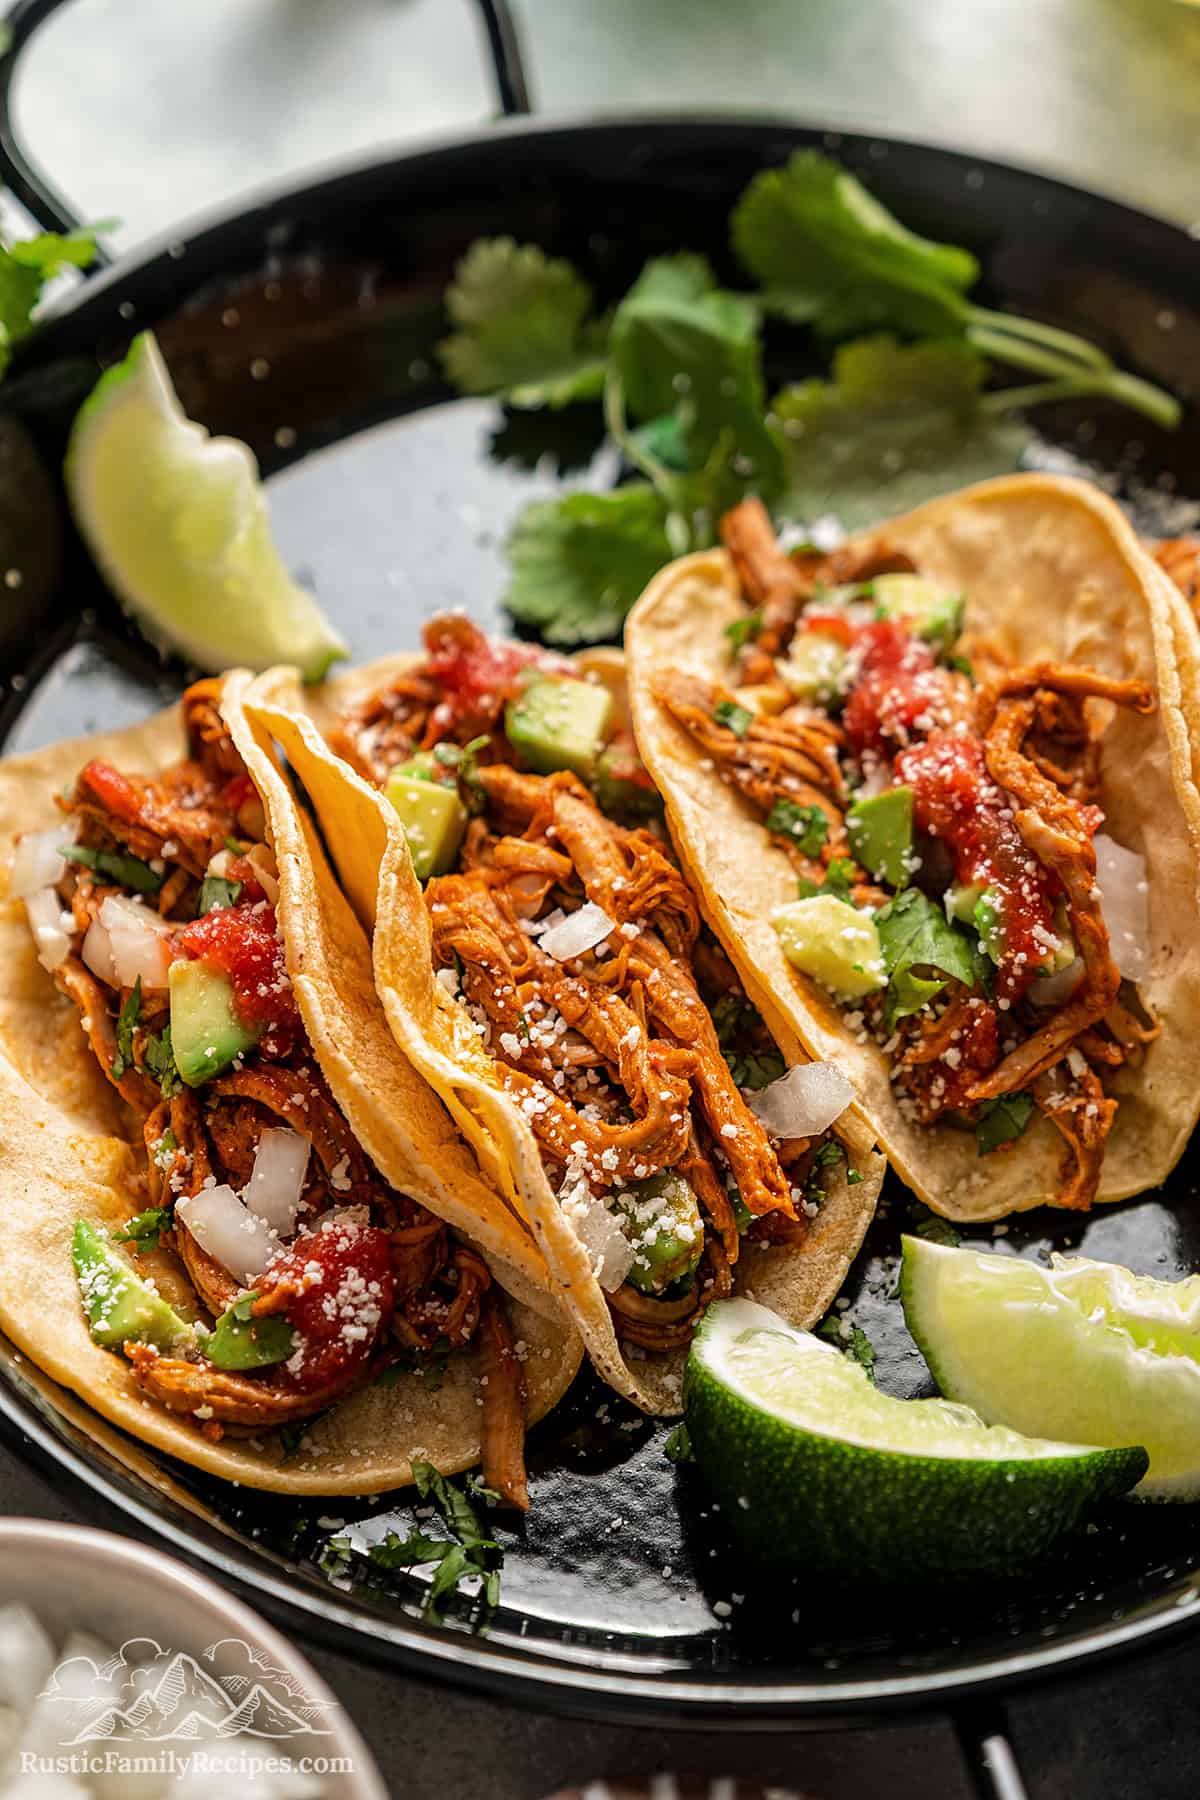 Three yucatan pork tacos with toppings.